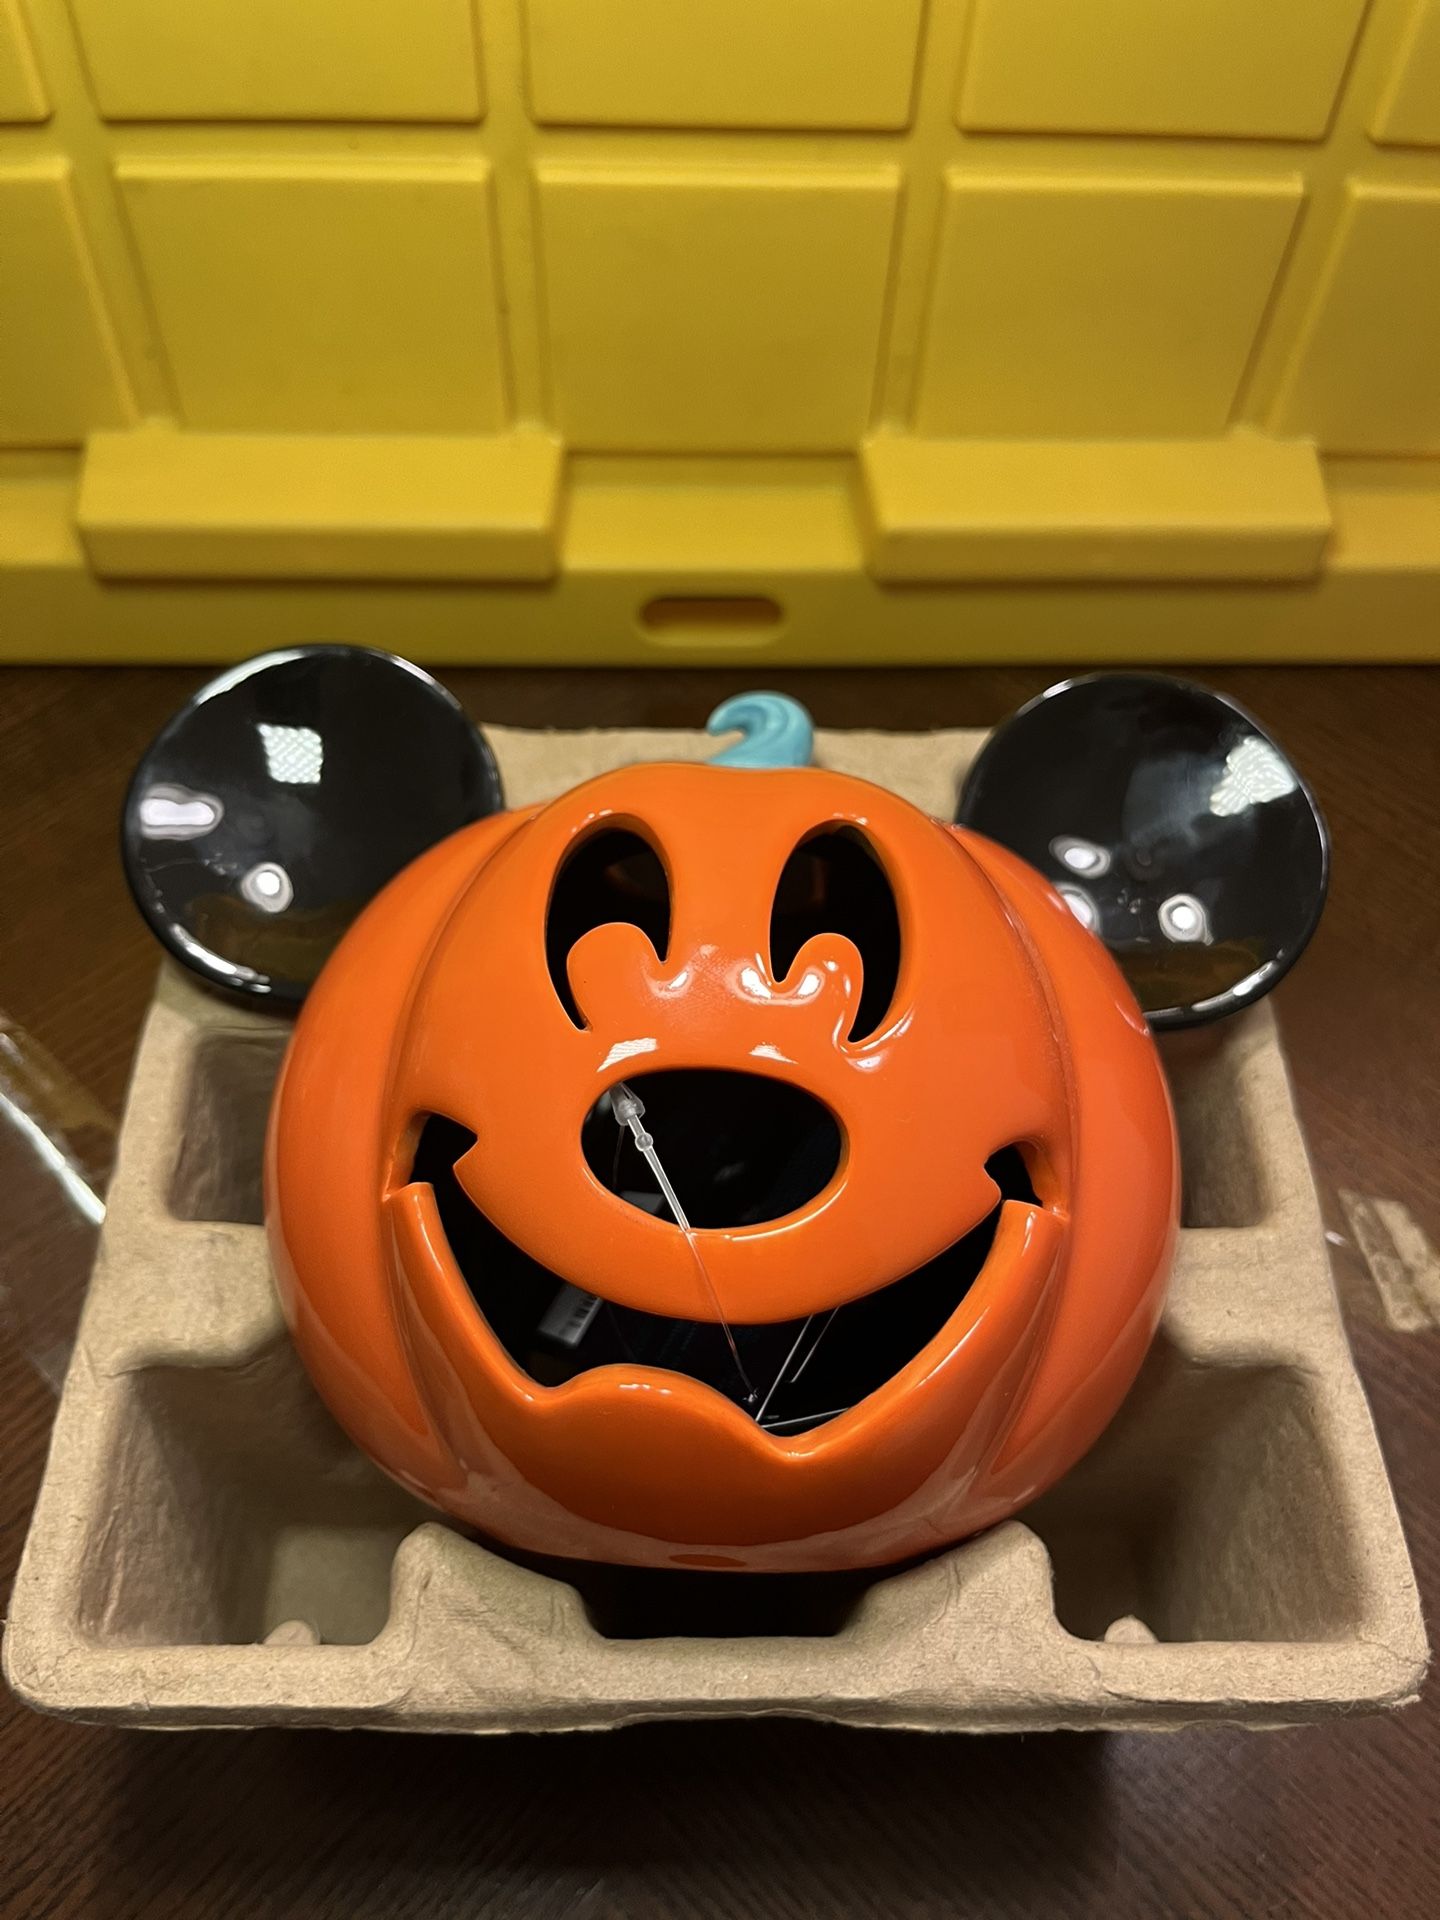 Disney Halloween Mickey Mouse Candle Holder 